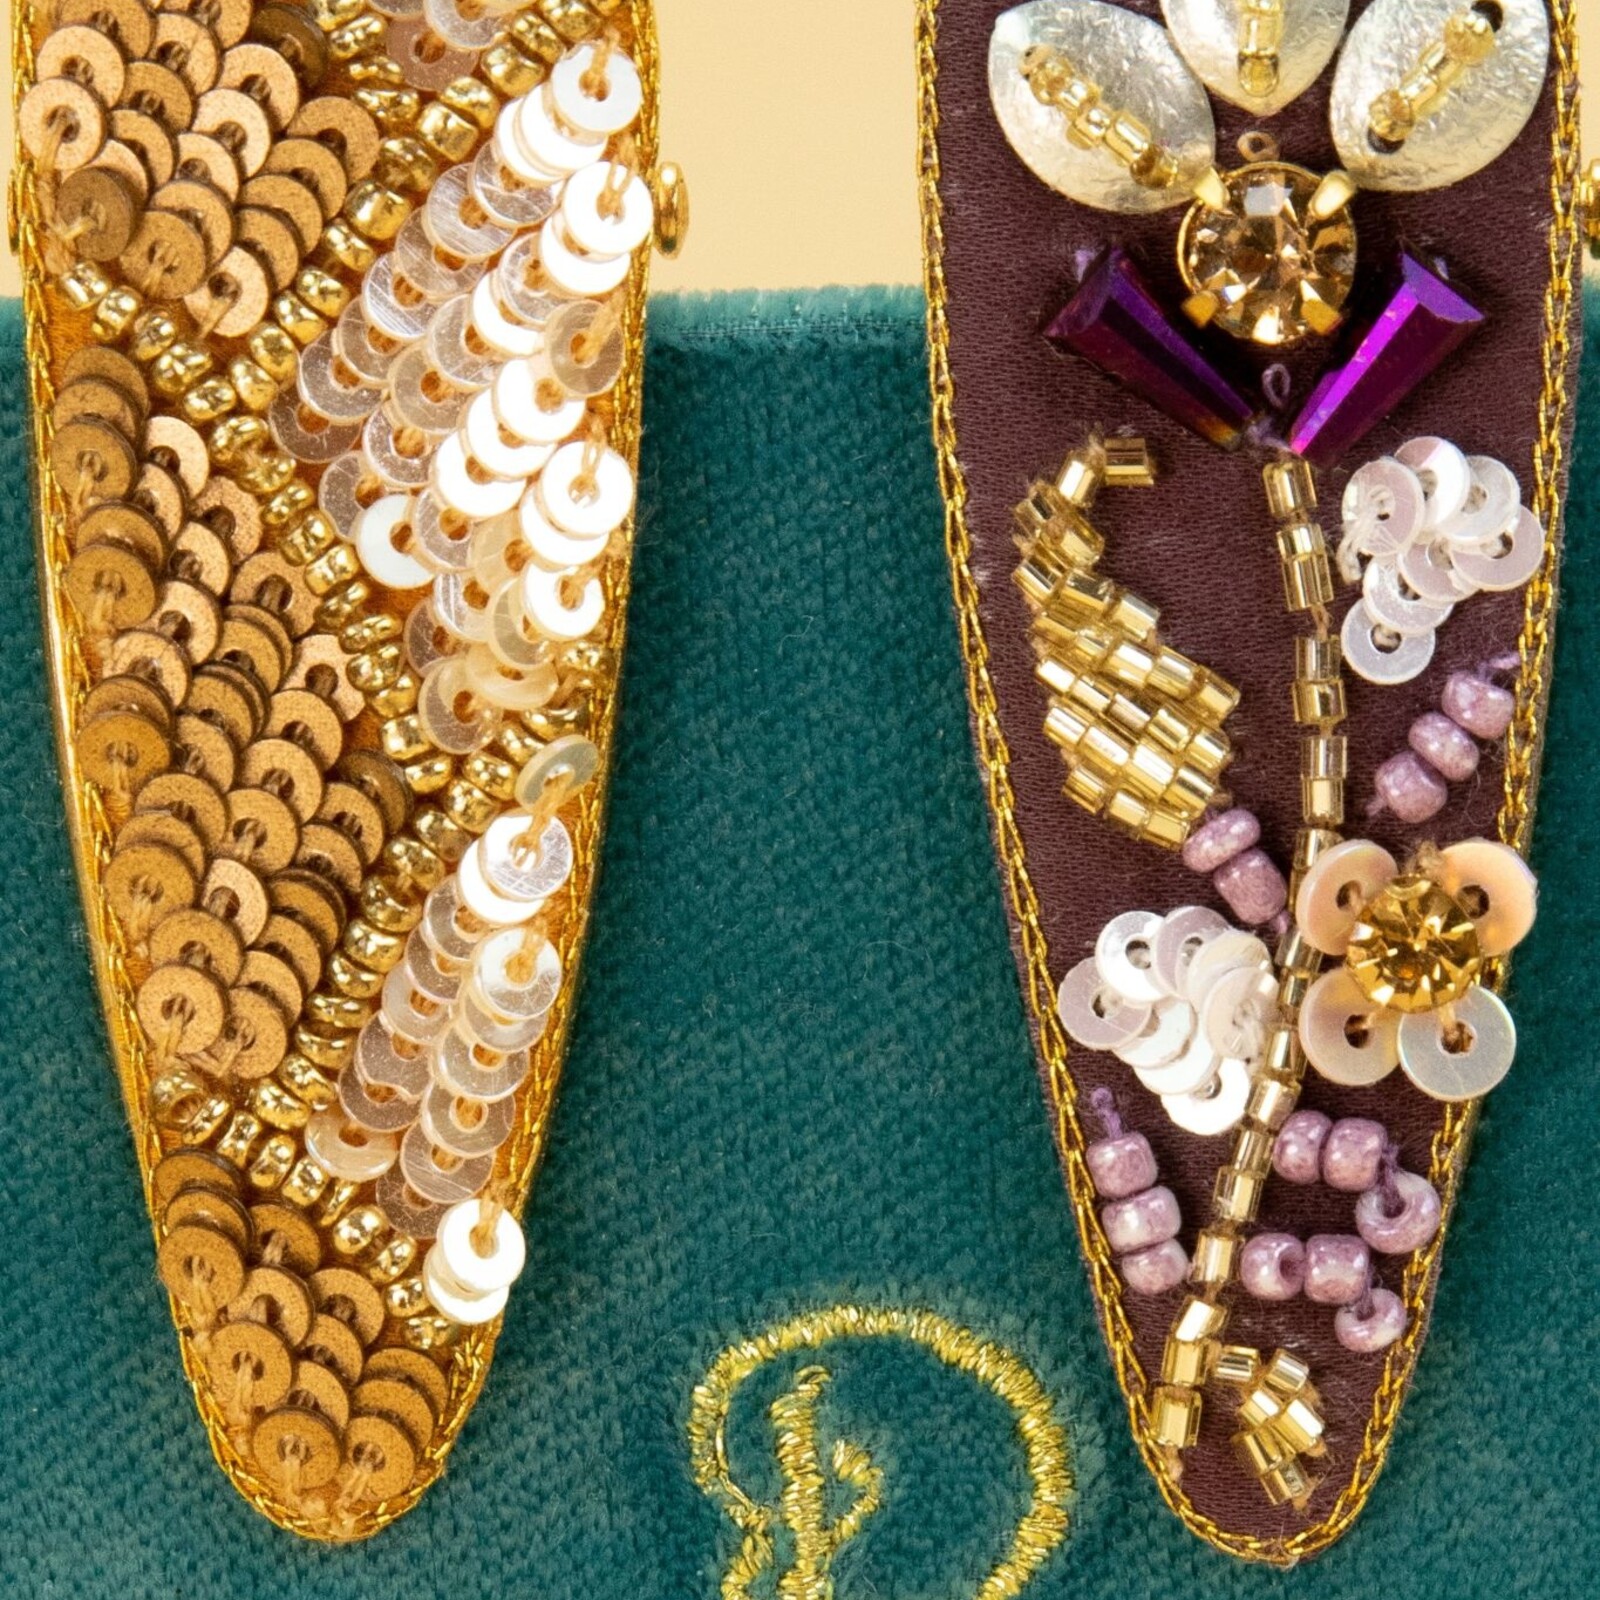 Powder Jewelled Hairclips Mulberry/Gold  (2) JEW9 loading=